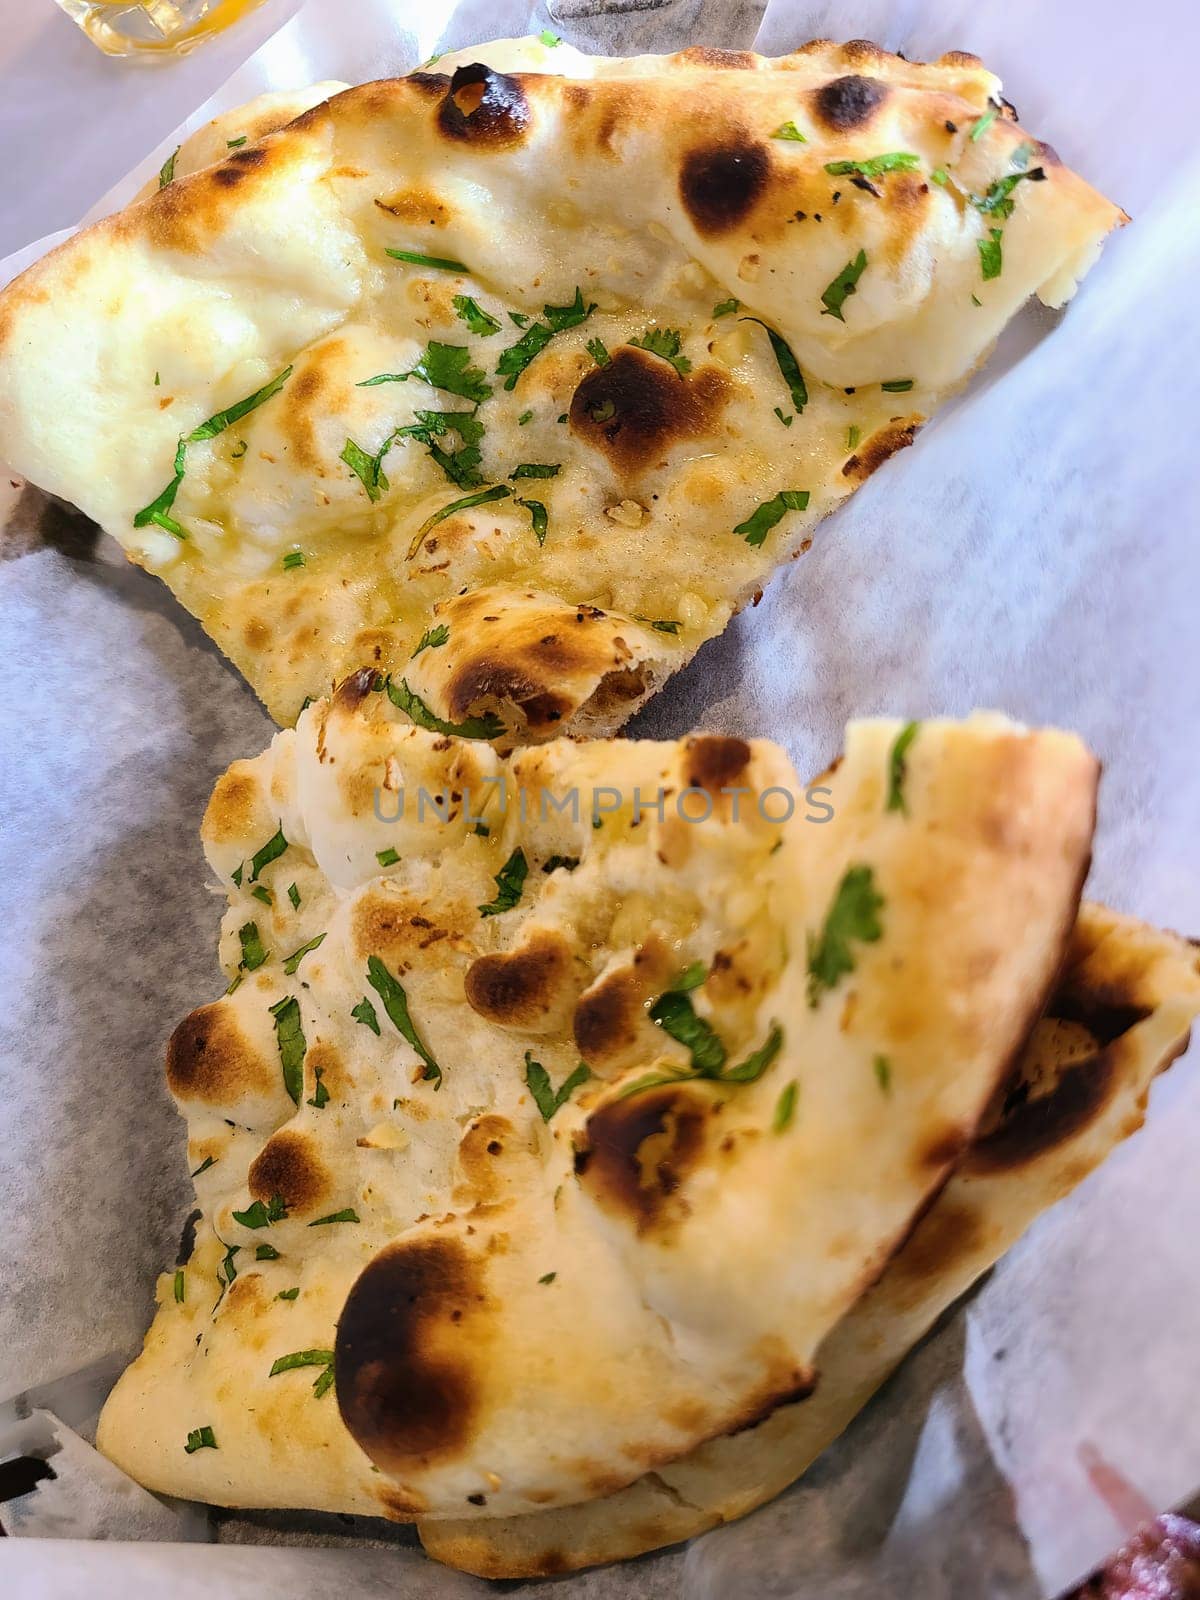 Freshly baked naan bread sprinkled with cilantro in an Indianapolis, Indiana restaurant, showcasing traditional Indian cuisine in 2023